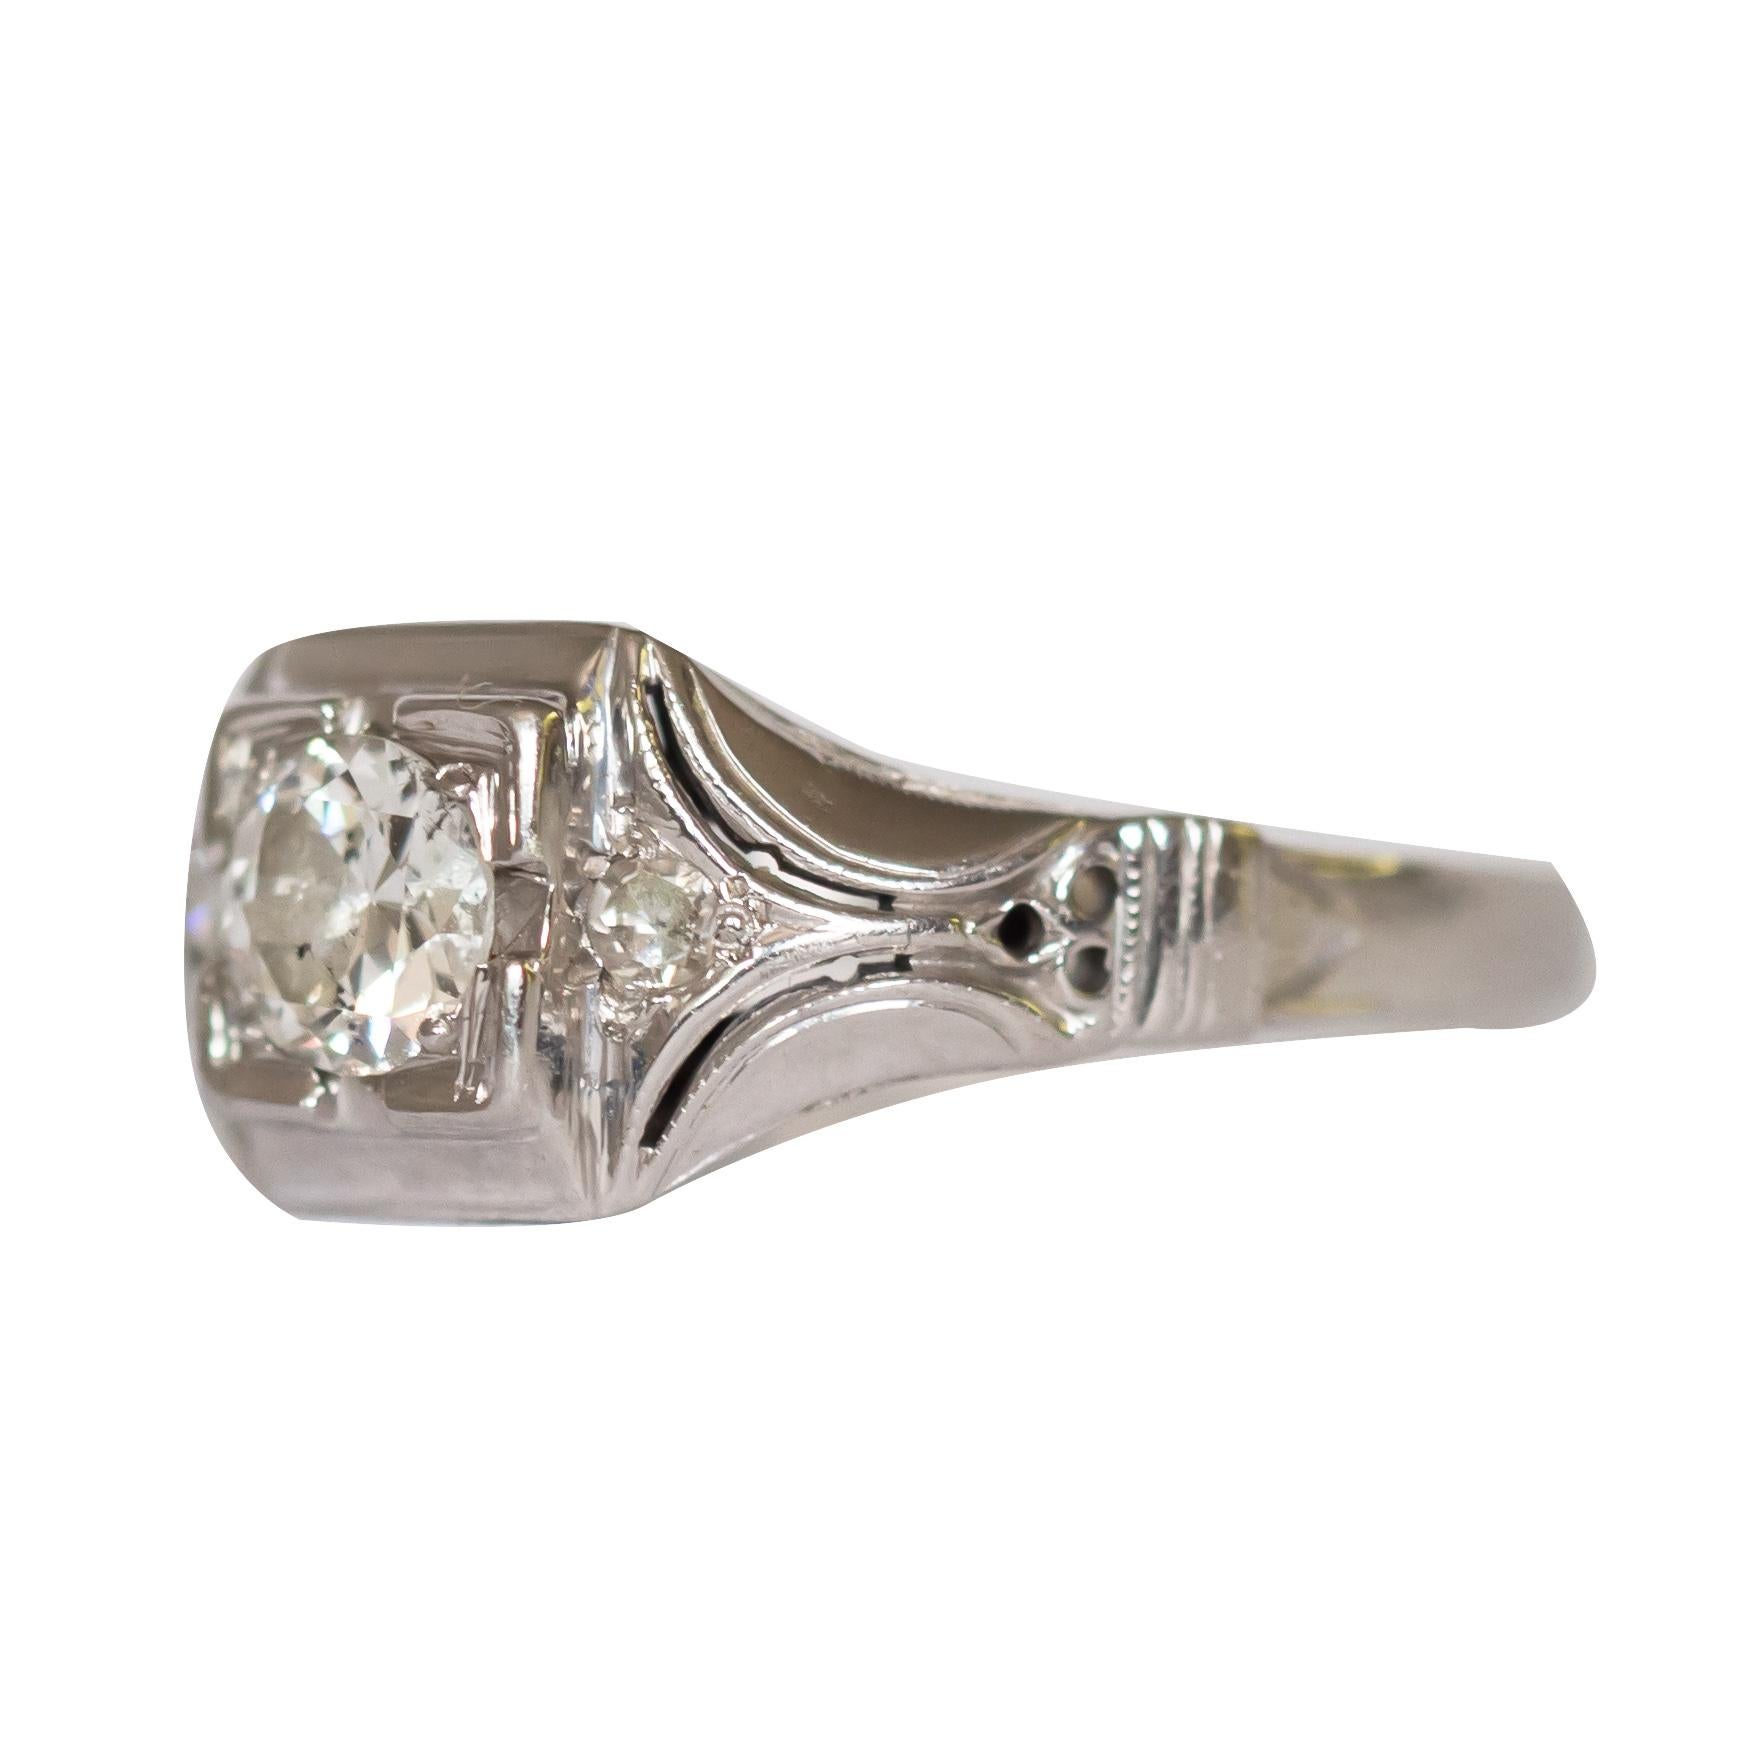 Ring Size: 7
Metal Type: 18 karat White Gold [Hallmarked, and Tested]
Weight: 2.5 grams

Center Diamond Details:
Weight: .45 carat
Cut: Old European
Color: H
Clarity: VS2

Side Diamond Details:
Weight: .06 carat, total weight
Cut: Old